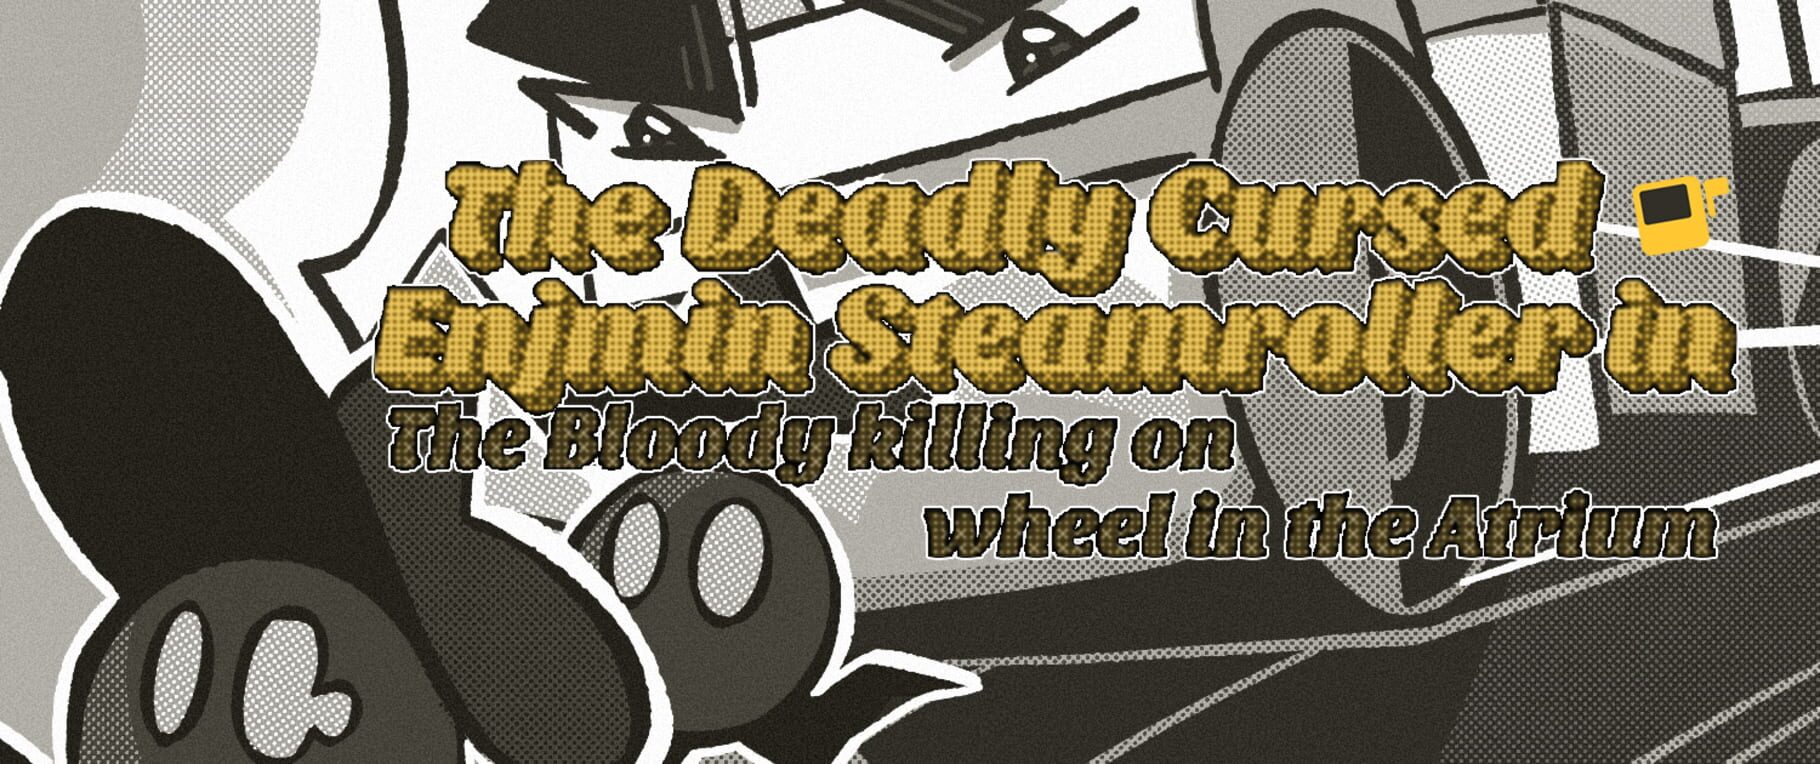 Arte - The Deadly Cursed Enjmin Steamroller in: The Bloody Killing on Wheel in the Atrium